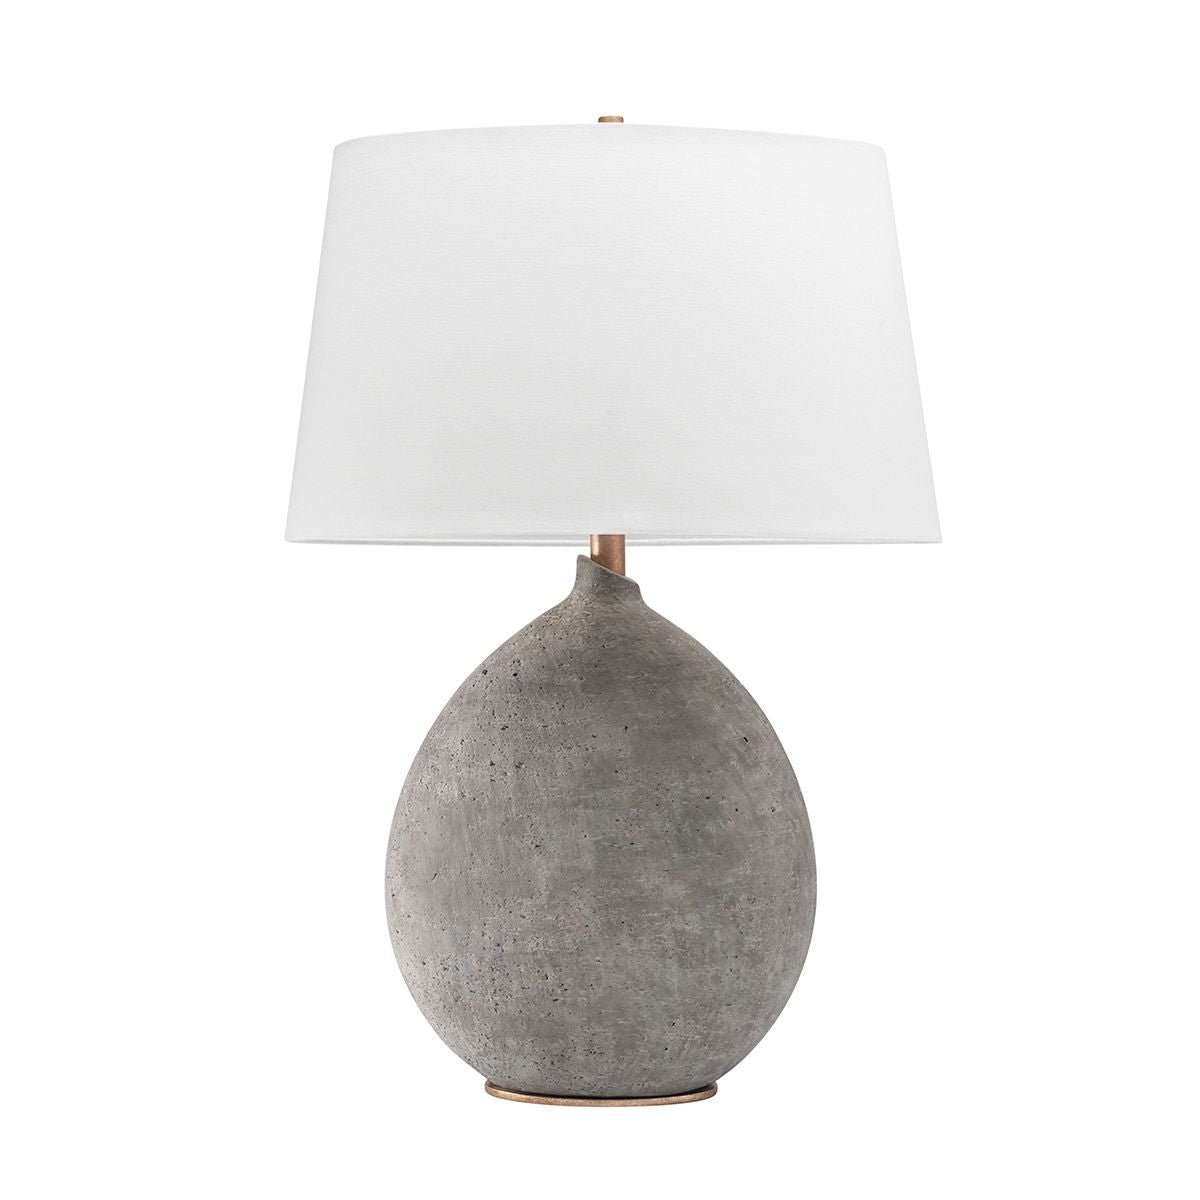 Denali Table Lamp with Gold Leaf Accents